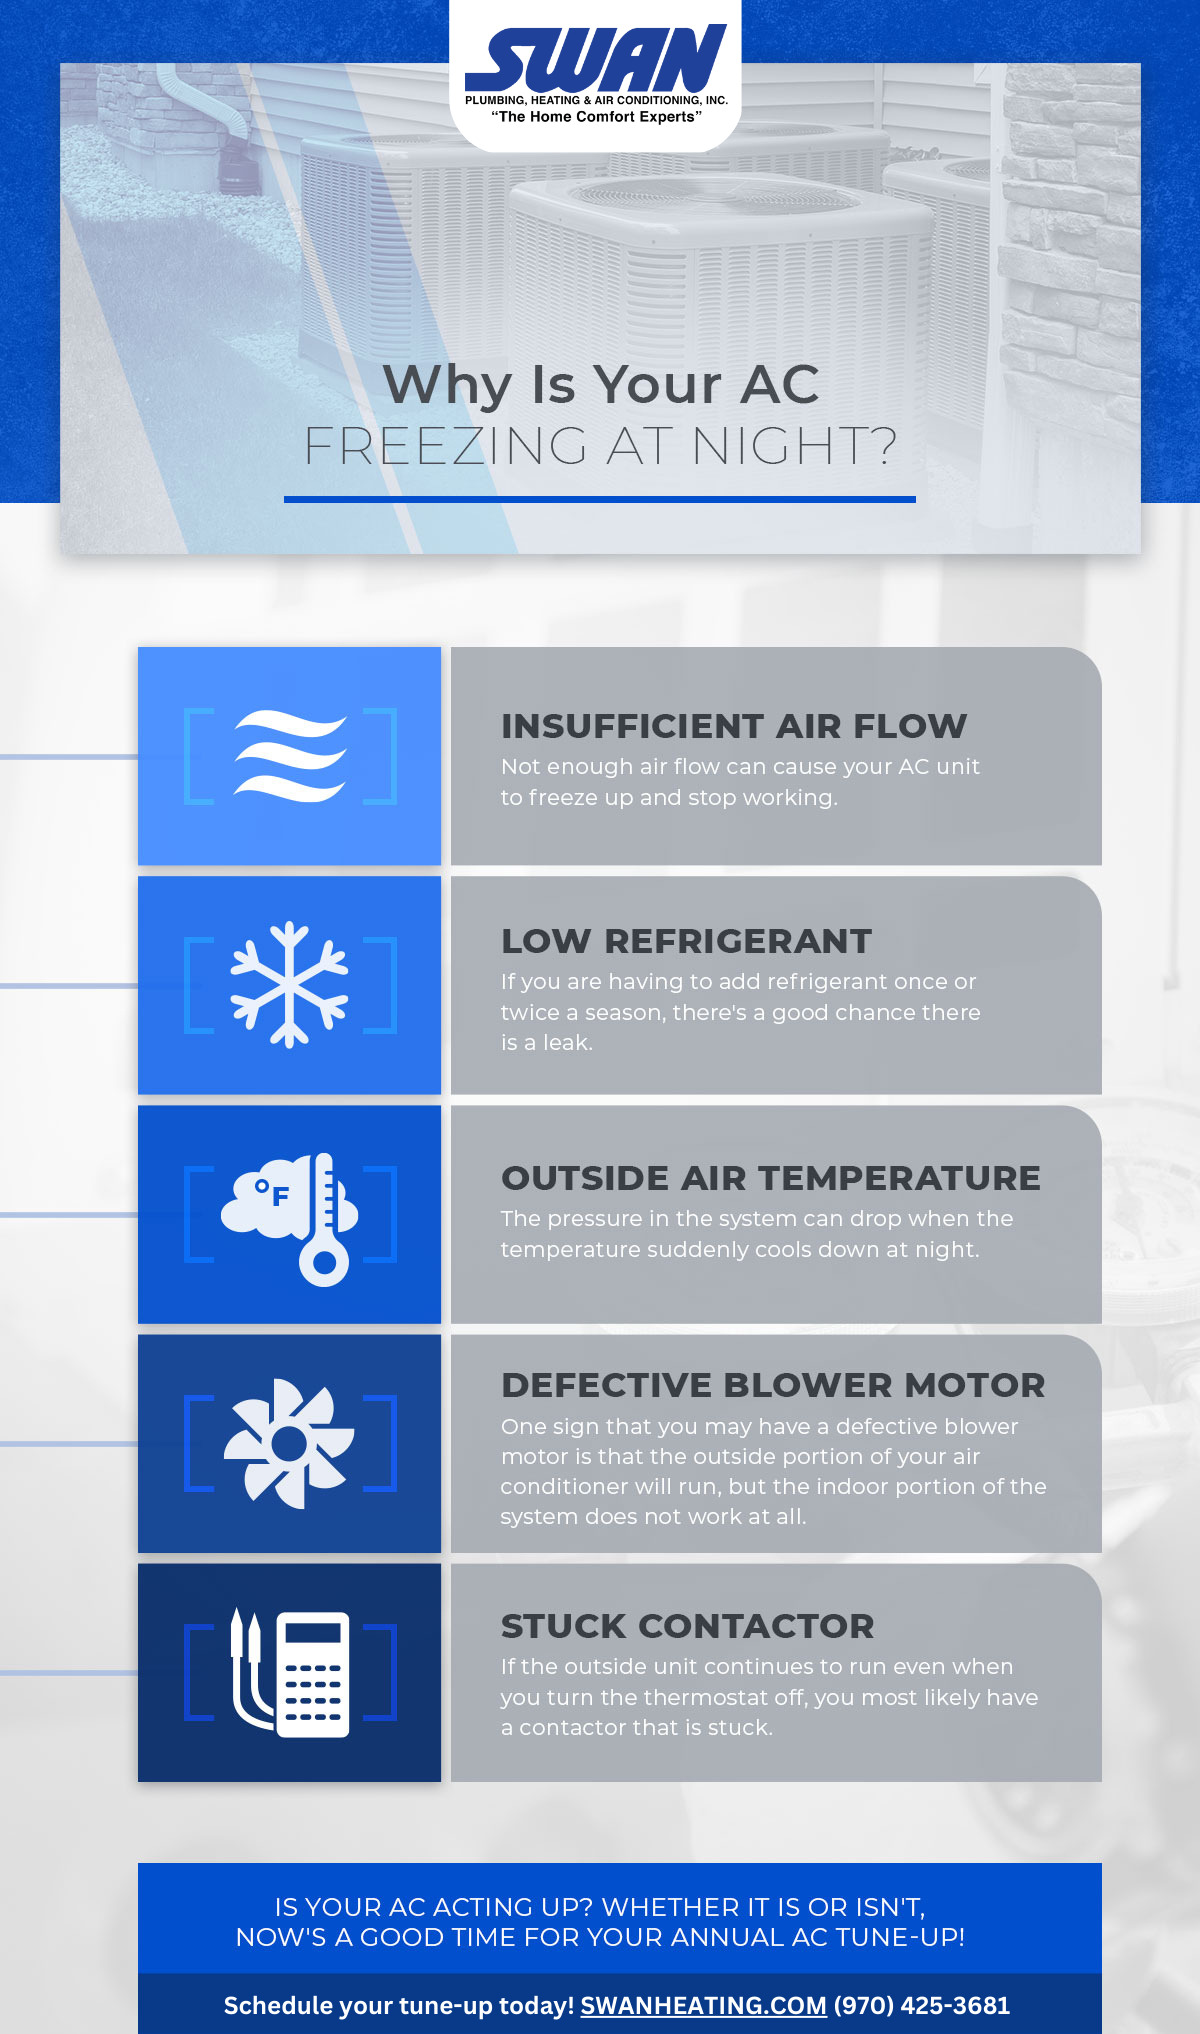 5 Reasons Why Your AC Is Freezing at Night